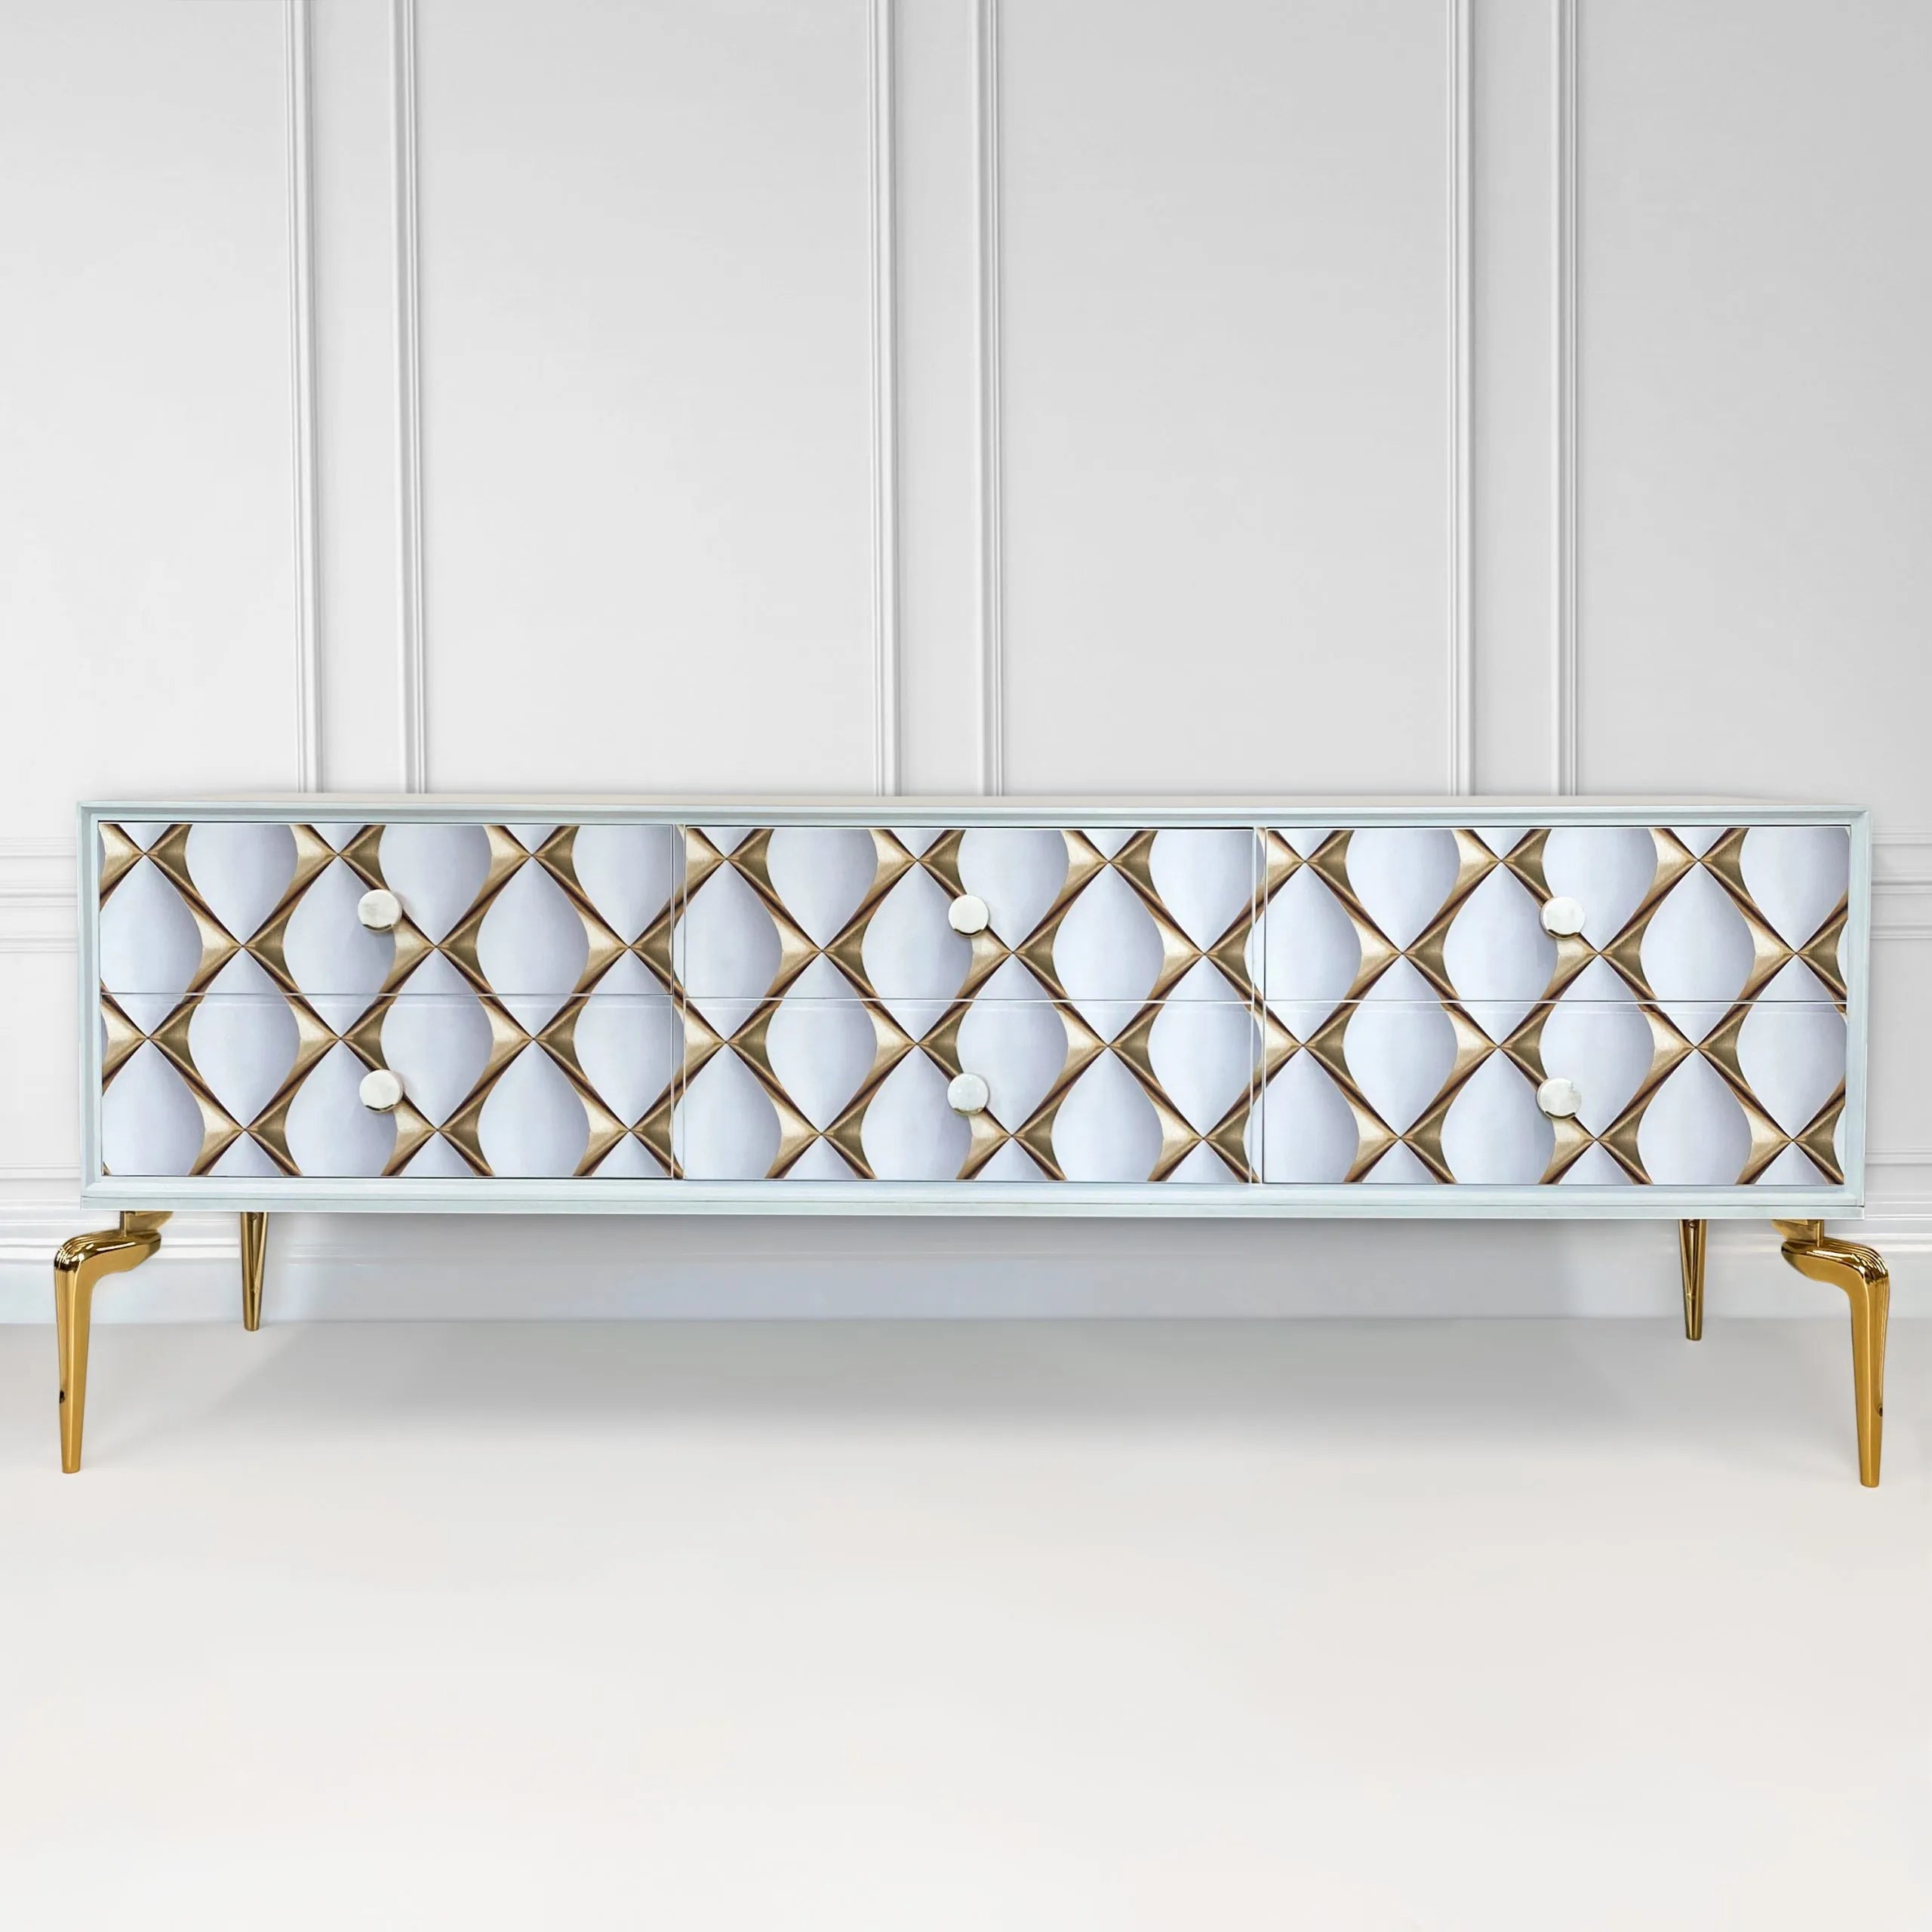 Painted White Sideboard - Gatsby Art Deco Vintage Sideboard in White and Gold